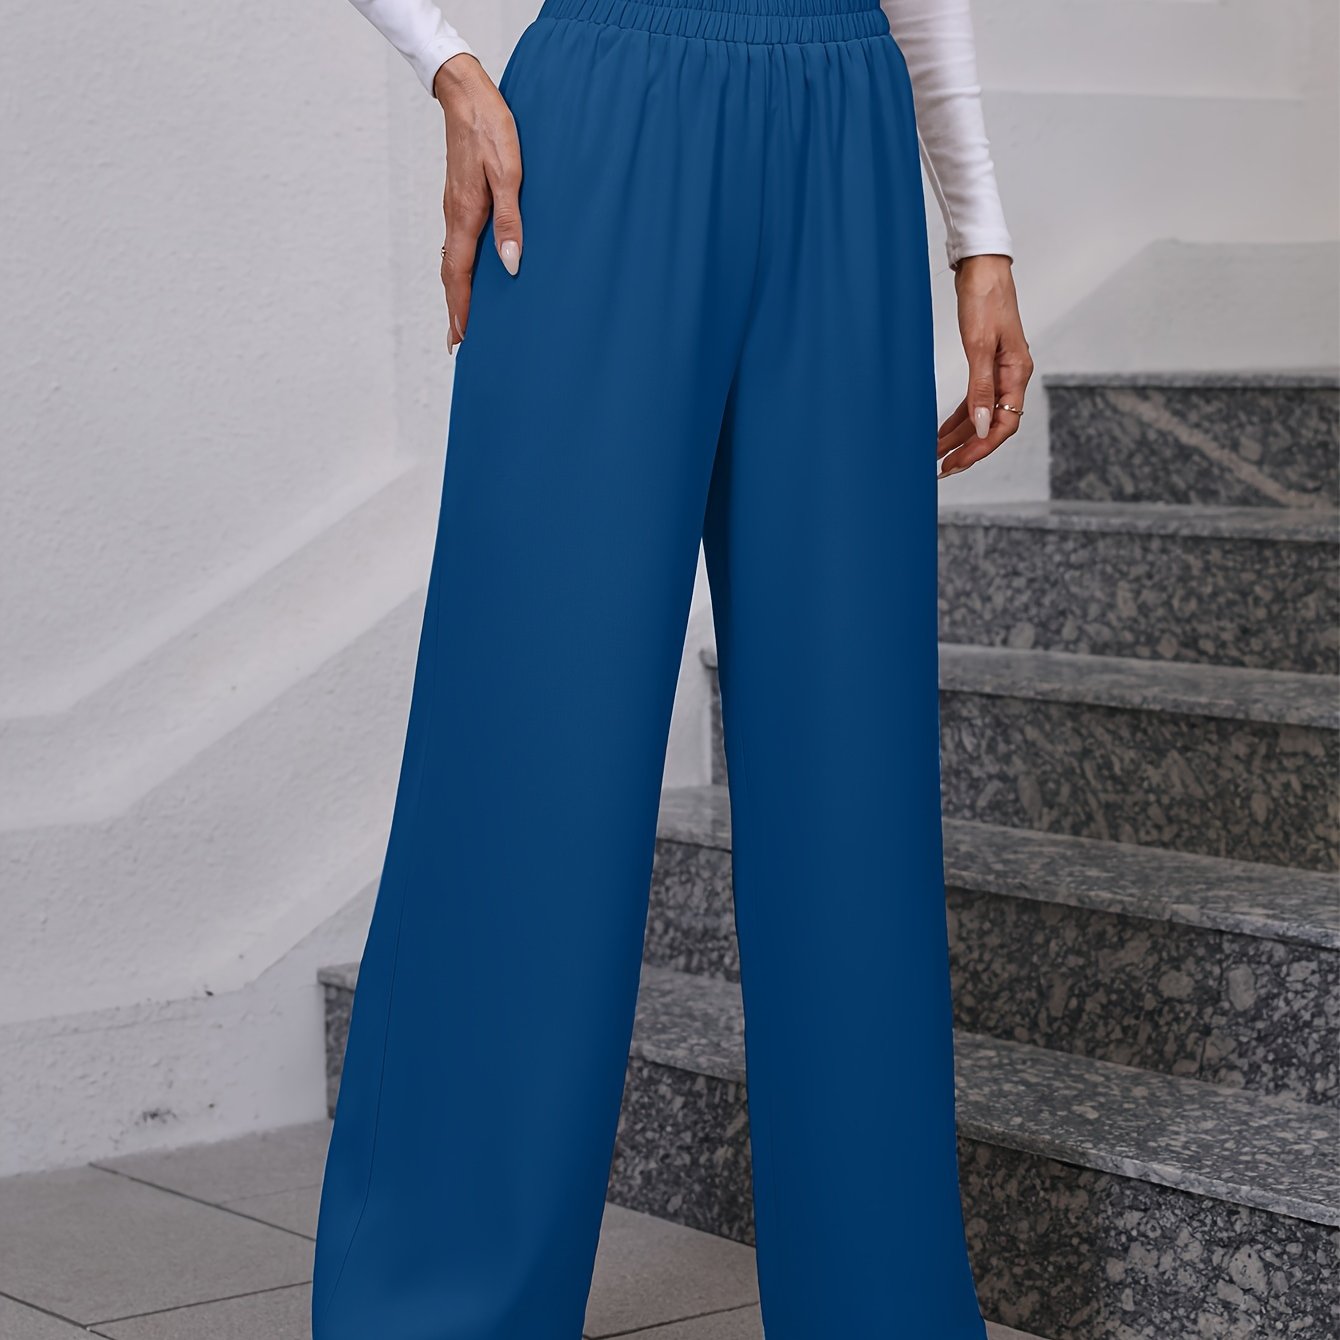 solid elastic waist loose pants casual wide leg pants for spring summer womens clothing